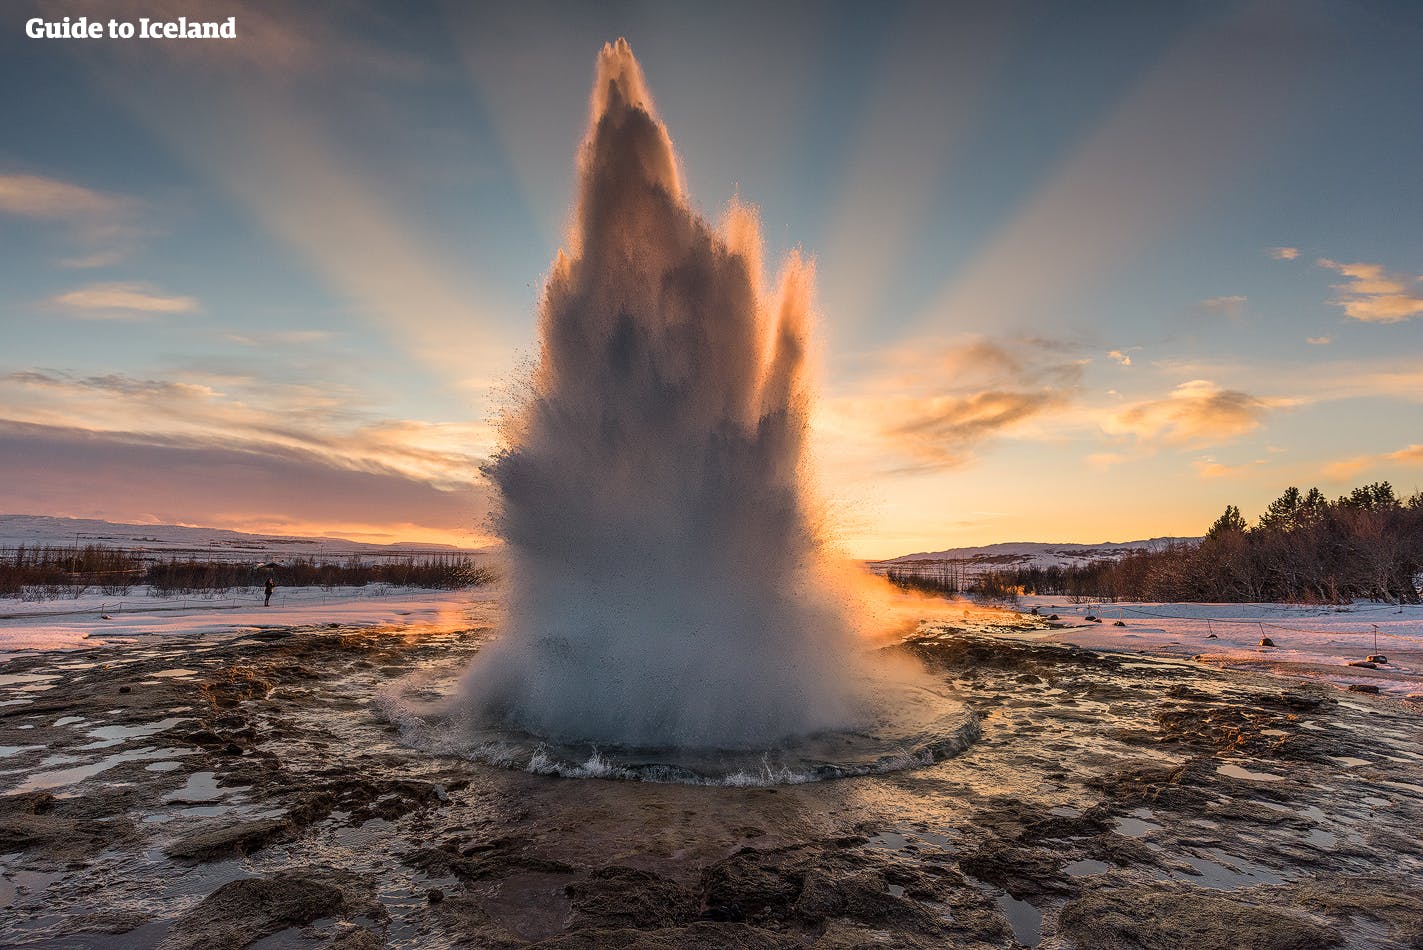 Strokkur is an erupting hot spring on the Golden Circle besides the now dormant Geysir.